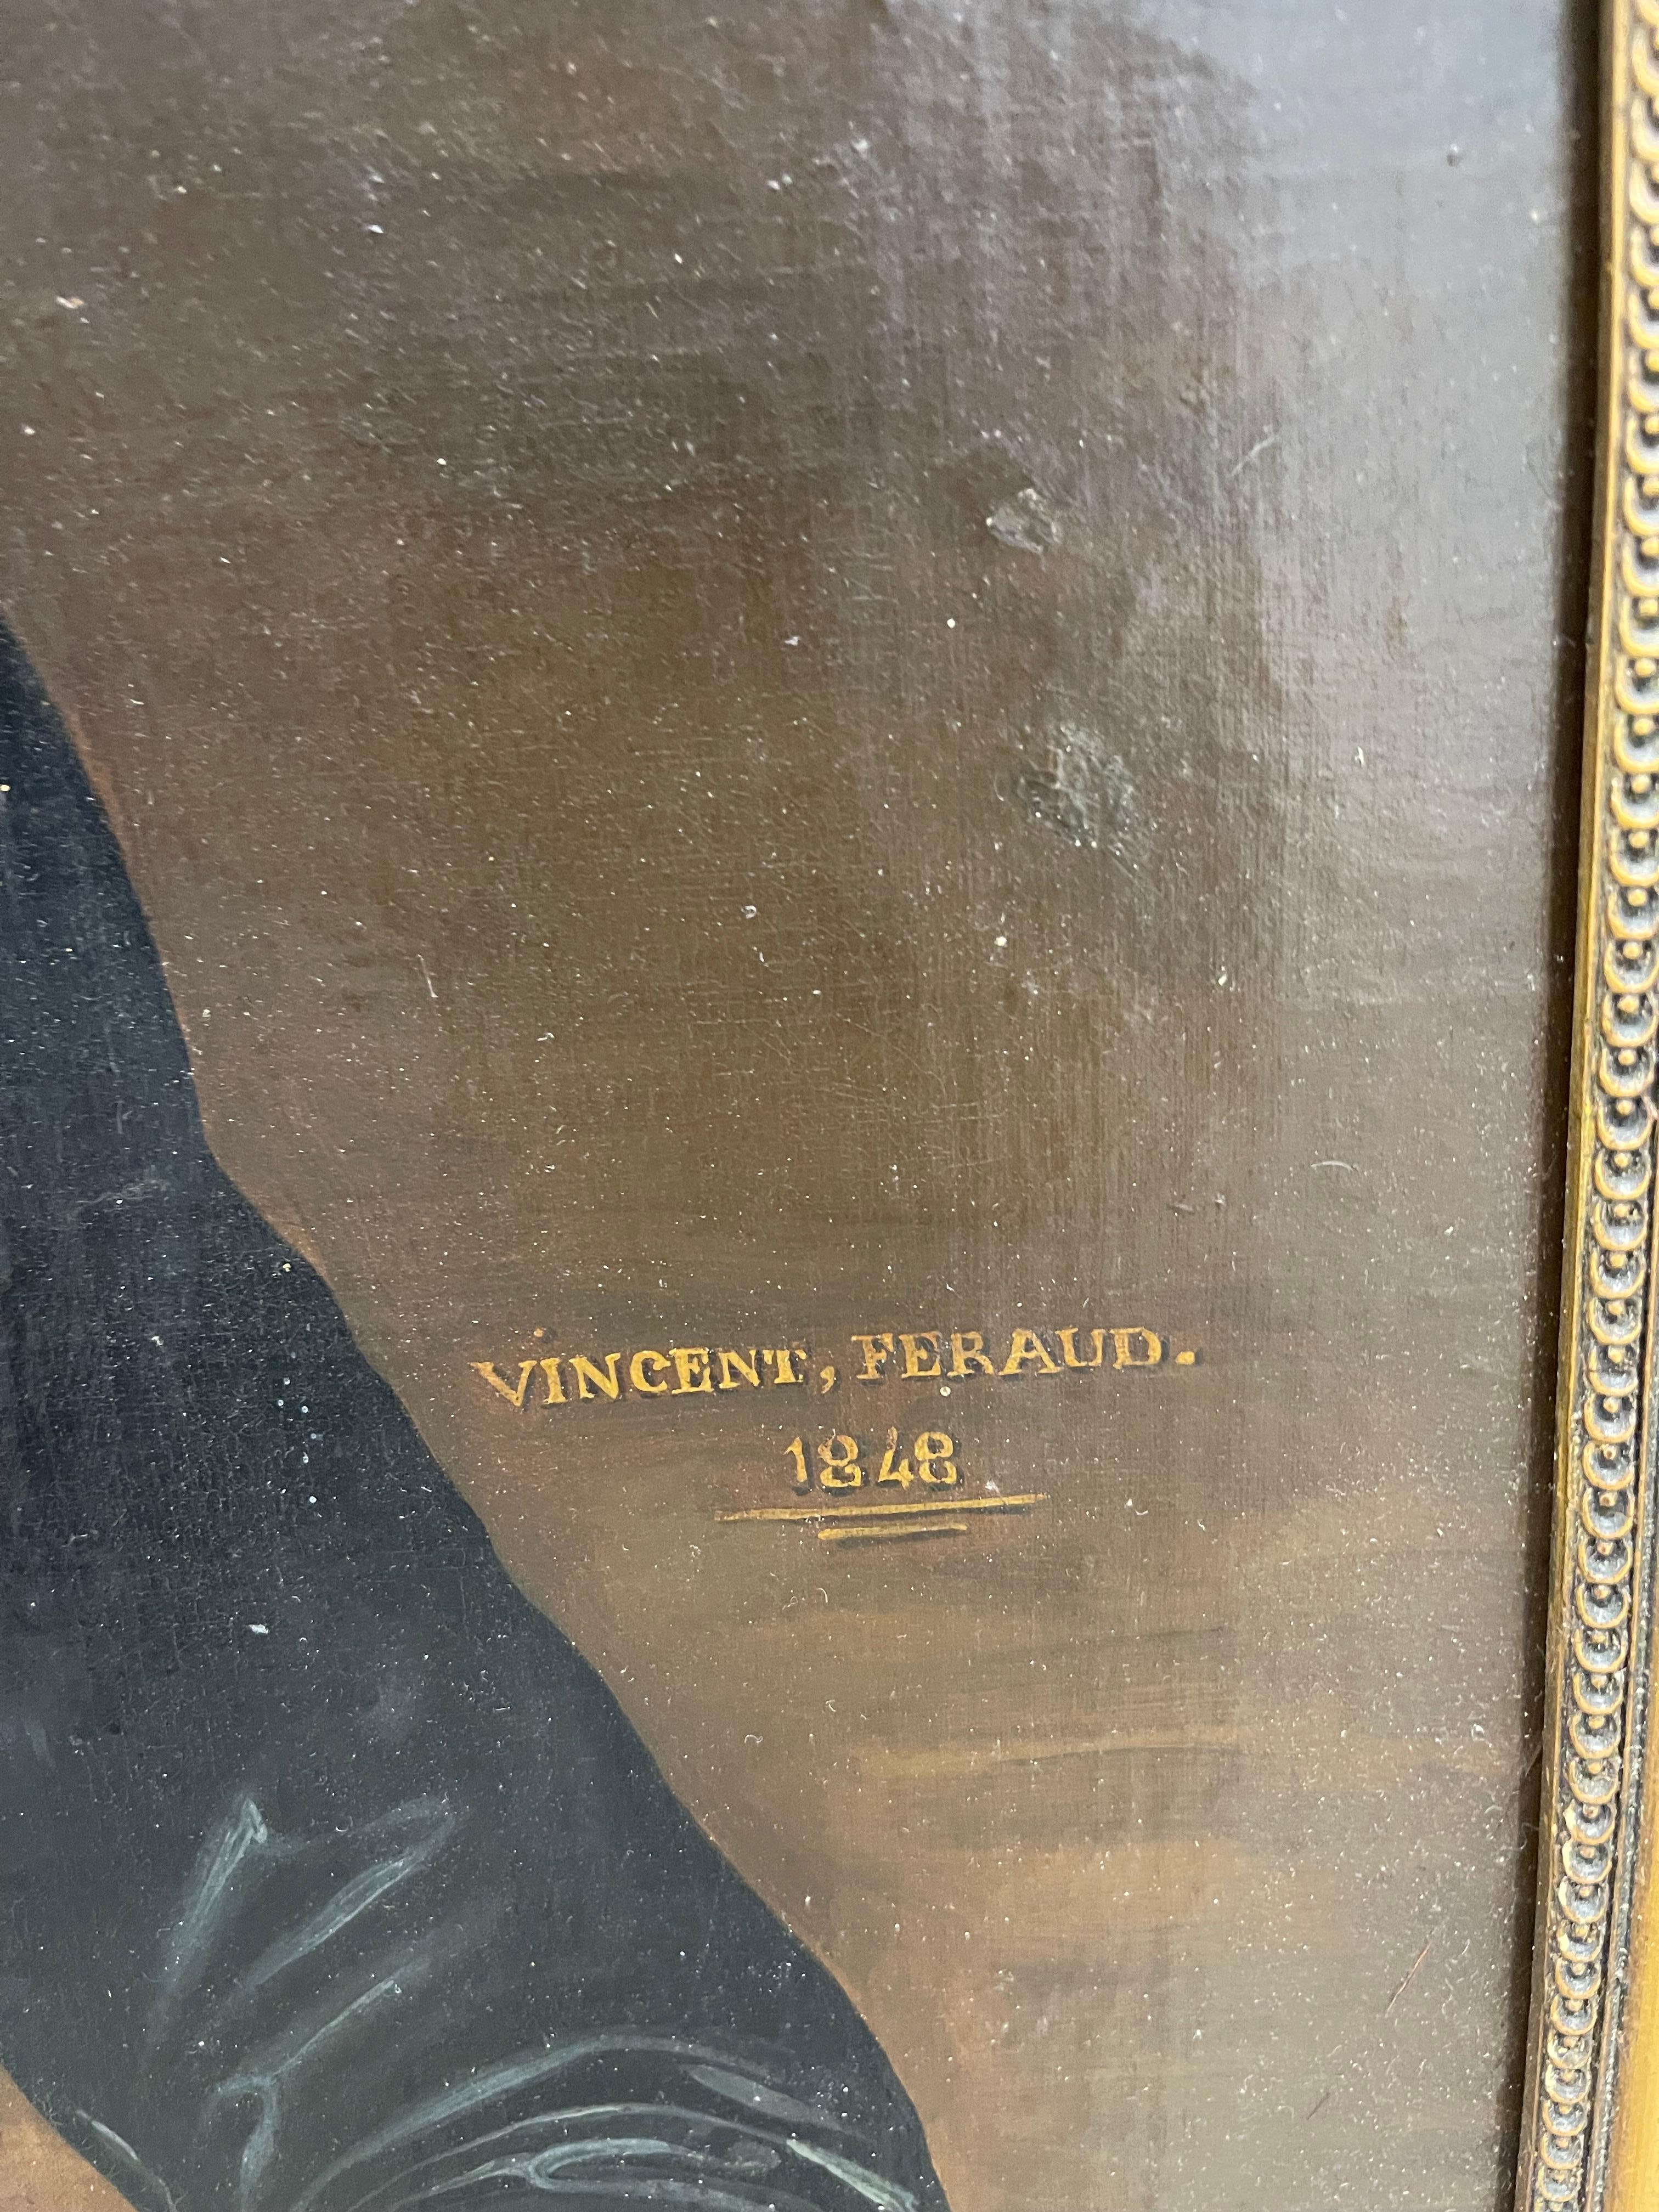 French Oil Painting Portrait of Woman Signed Vincent Ferraud 1848 In Good Condition For Sale In palm beach, FL